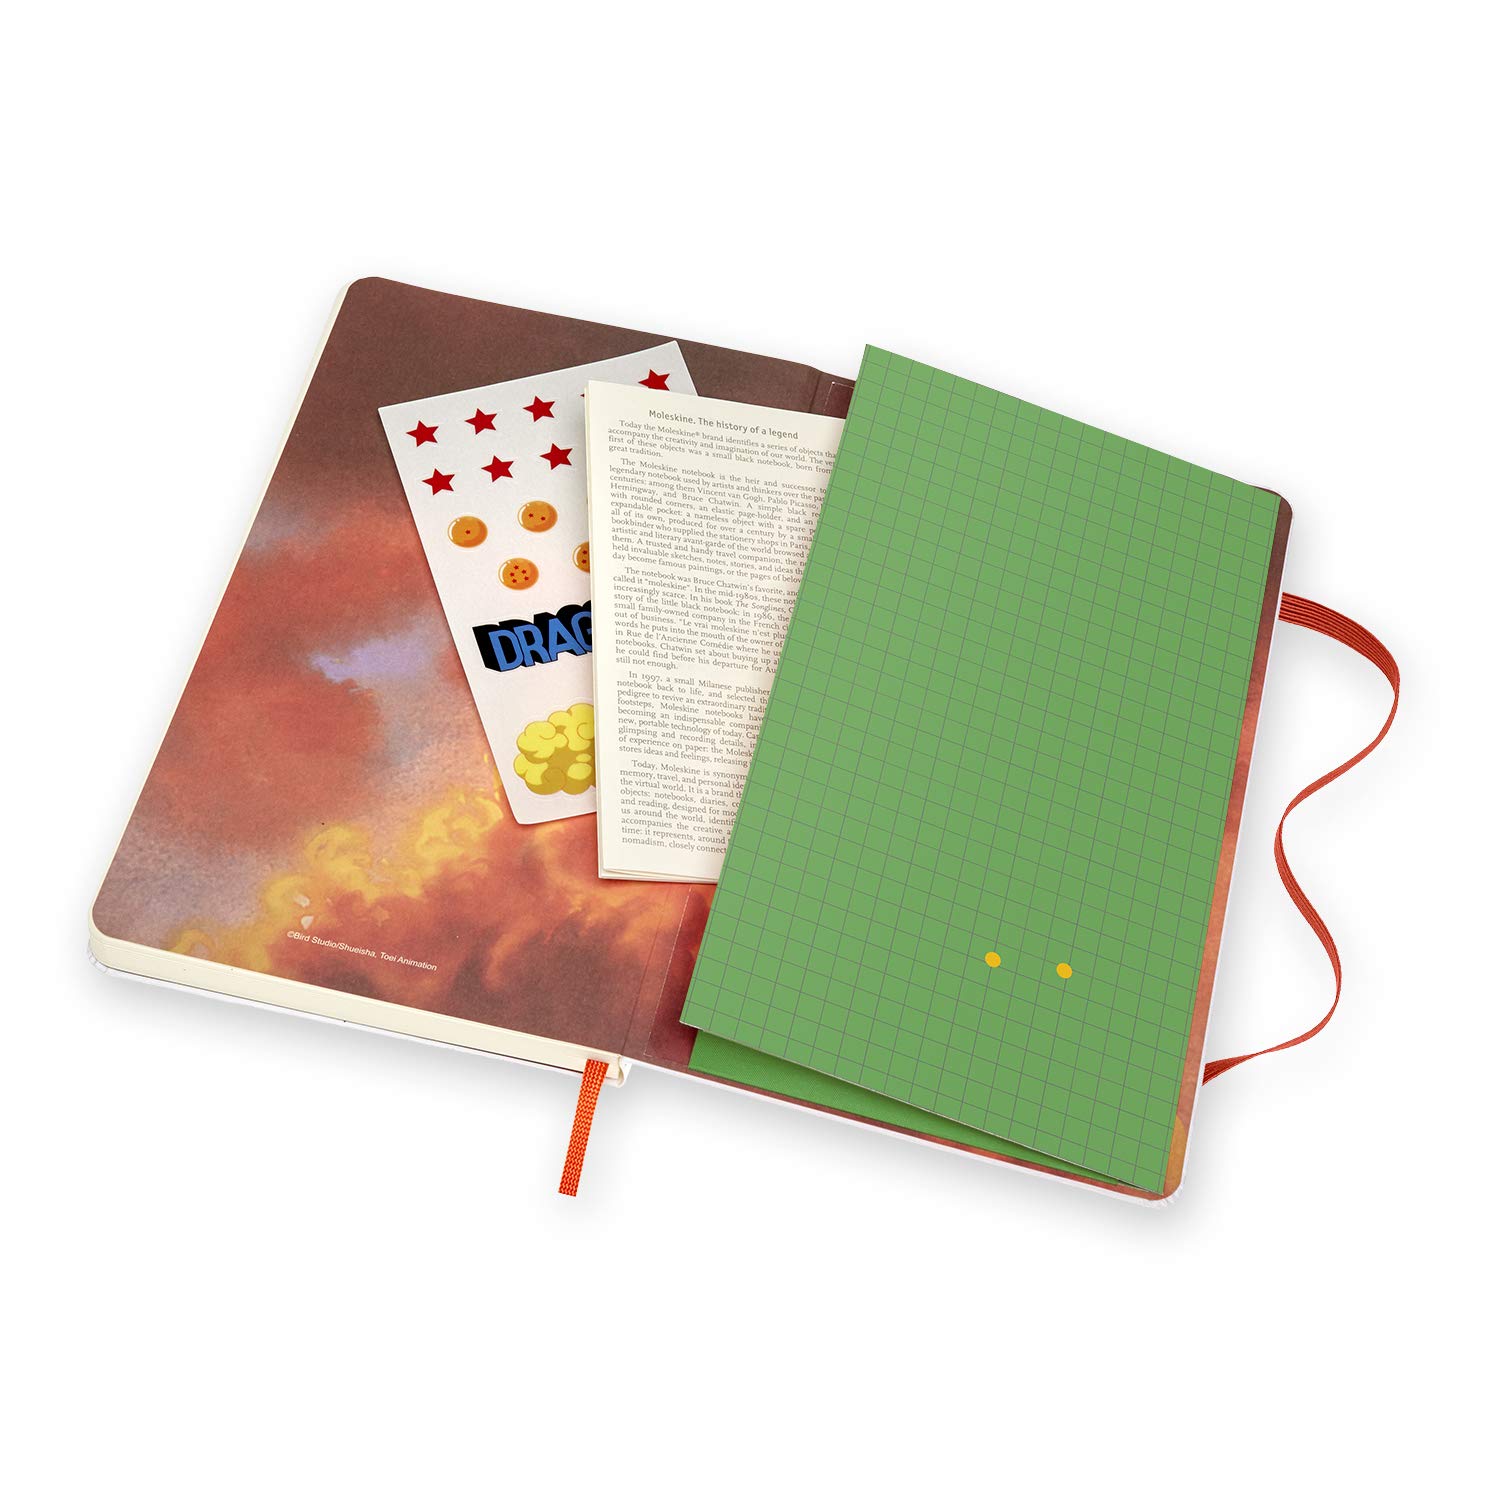 Carnet - Moleskine Dragonball Limited Edition Dotted Notebook - Large, Hard Cover, White - Chichi | Moleskine